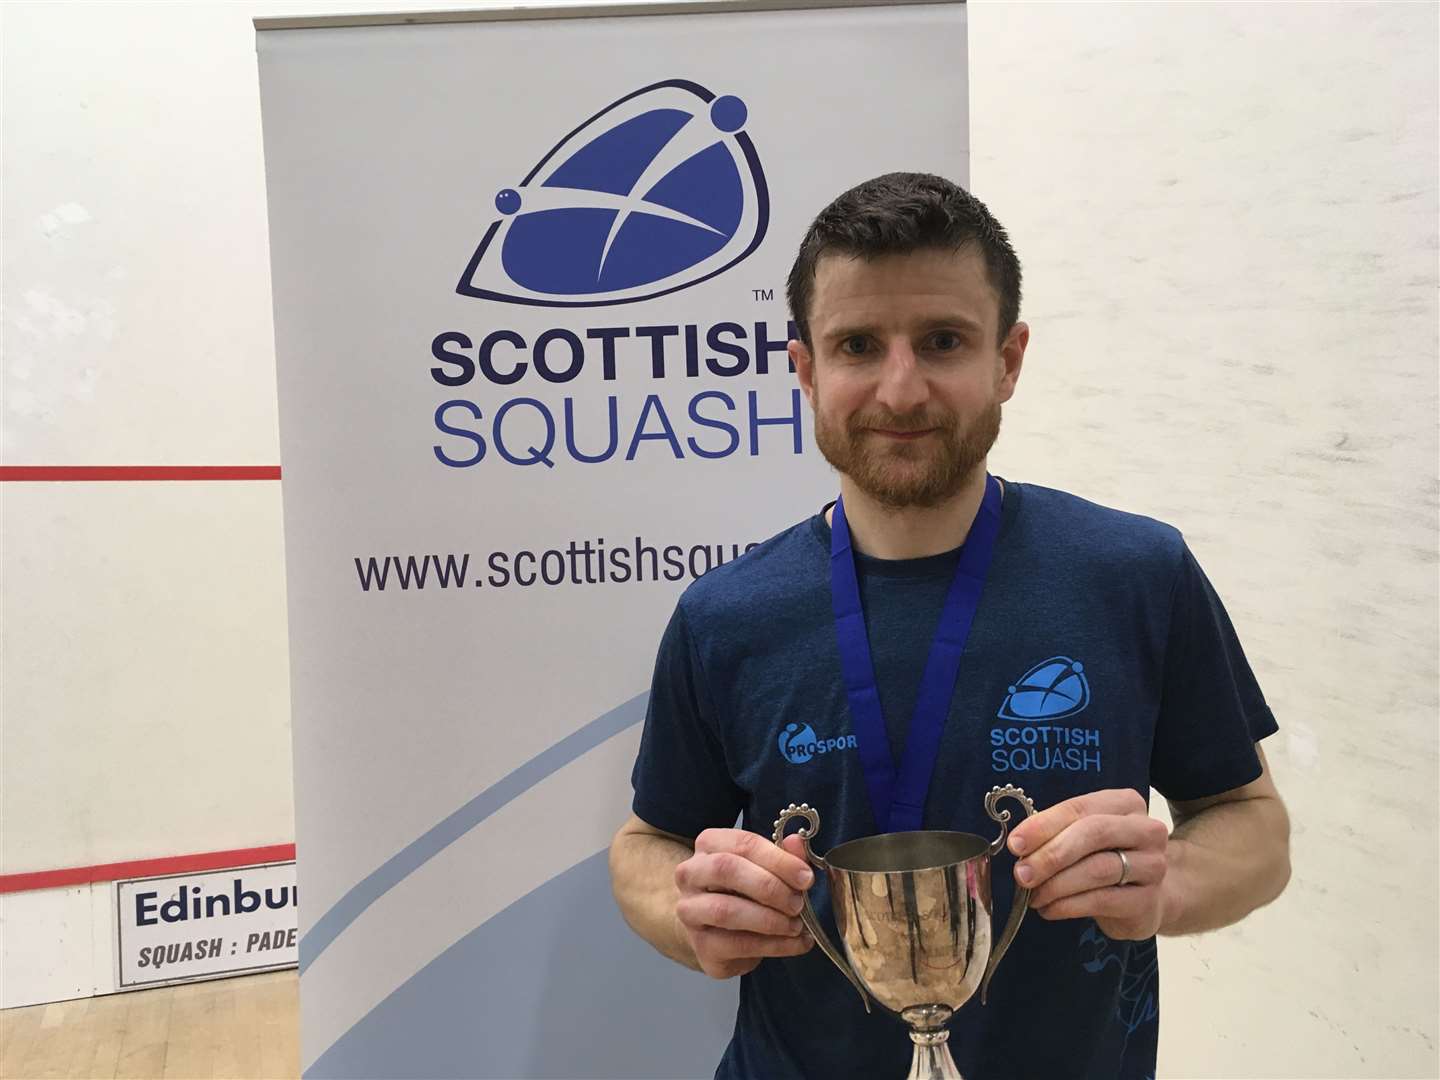 Alan Clyne is a 10-time Scottish champion – but retired from the PSA Tour last October to take up a coaching role at Princeton University.